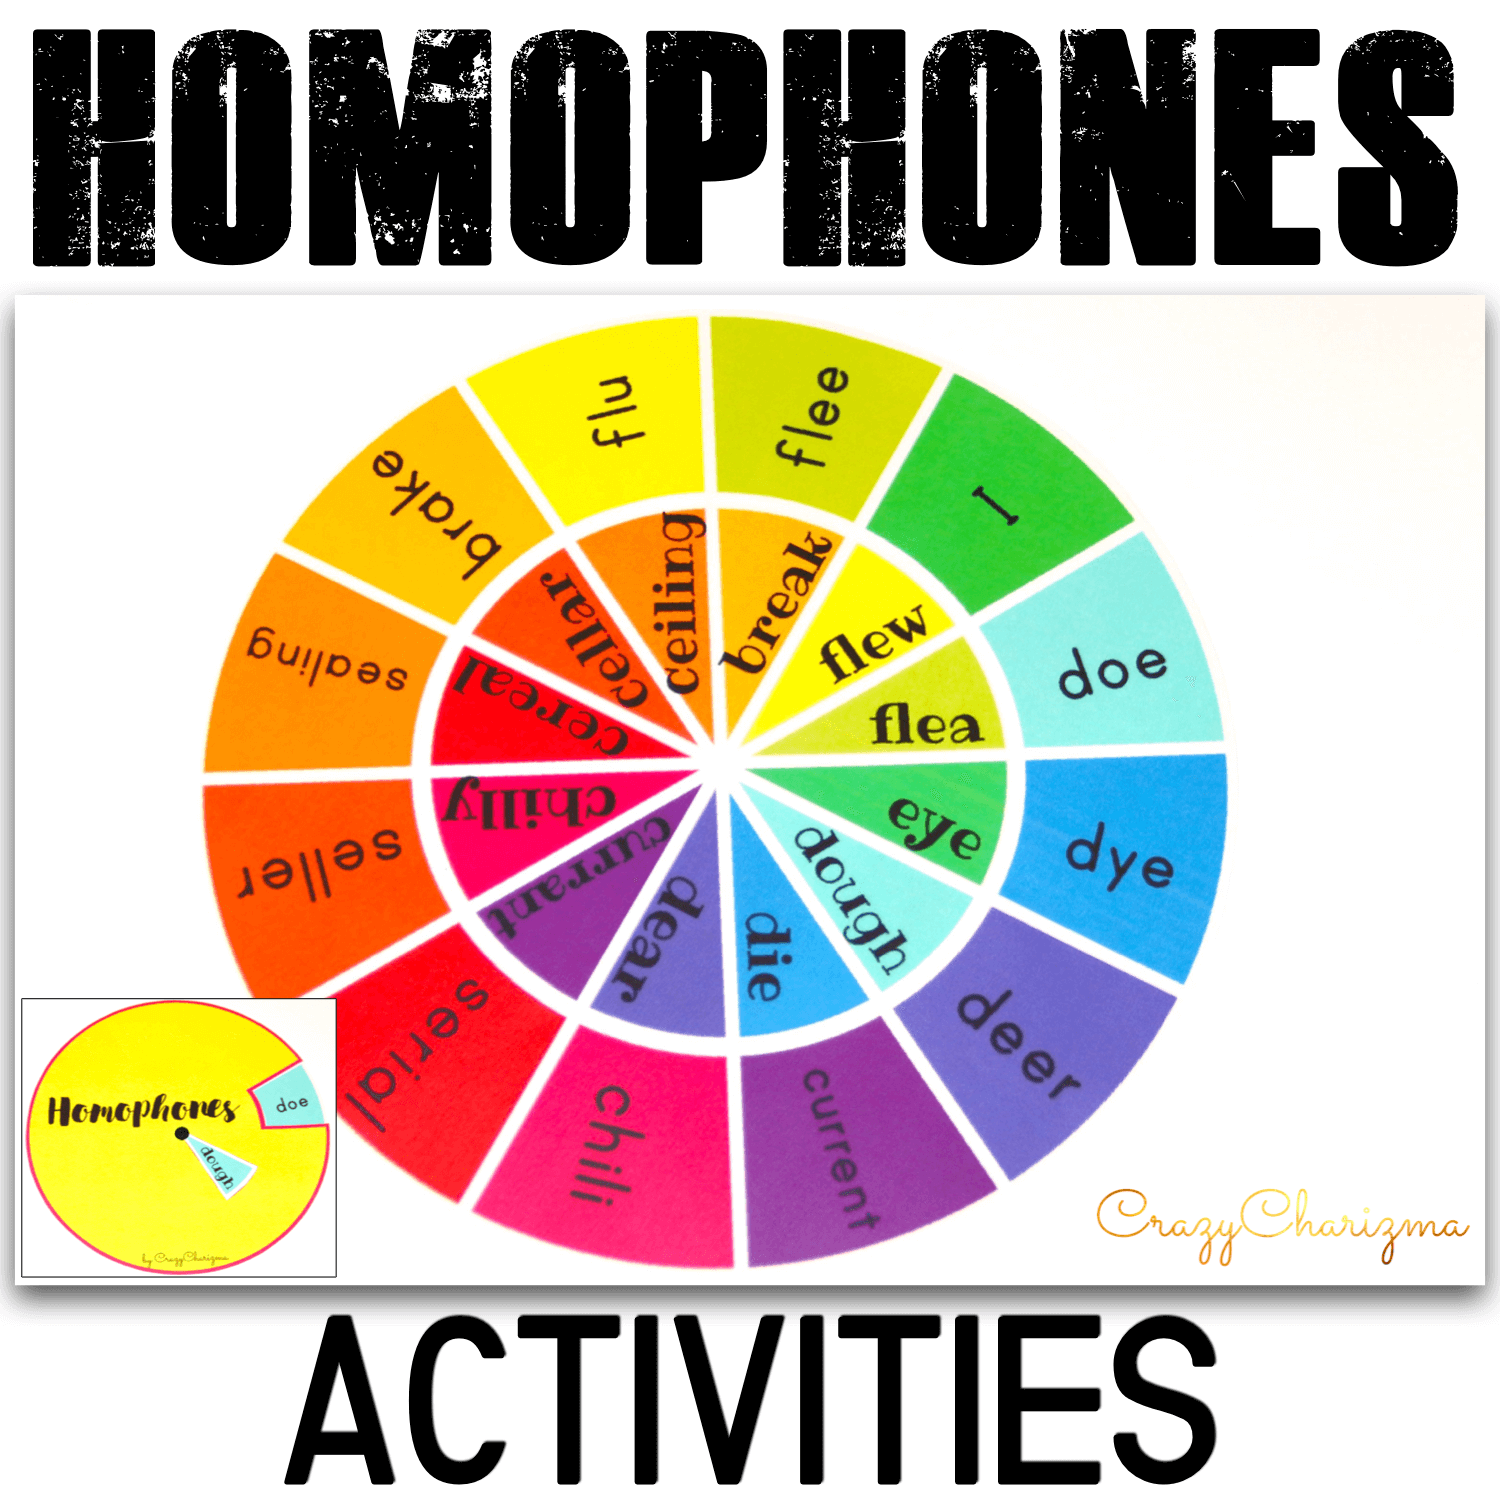 Homophones activities - Wheels are a fun way to introduce, practice or assess homophones. Use for classwork (pairwork or teamwork) or assessment. These 84 pairs of homophones will help your students prepare for state testing (supports common core standards)!